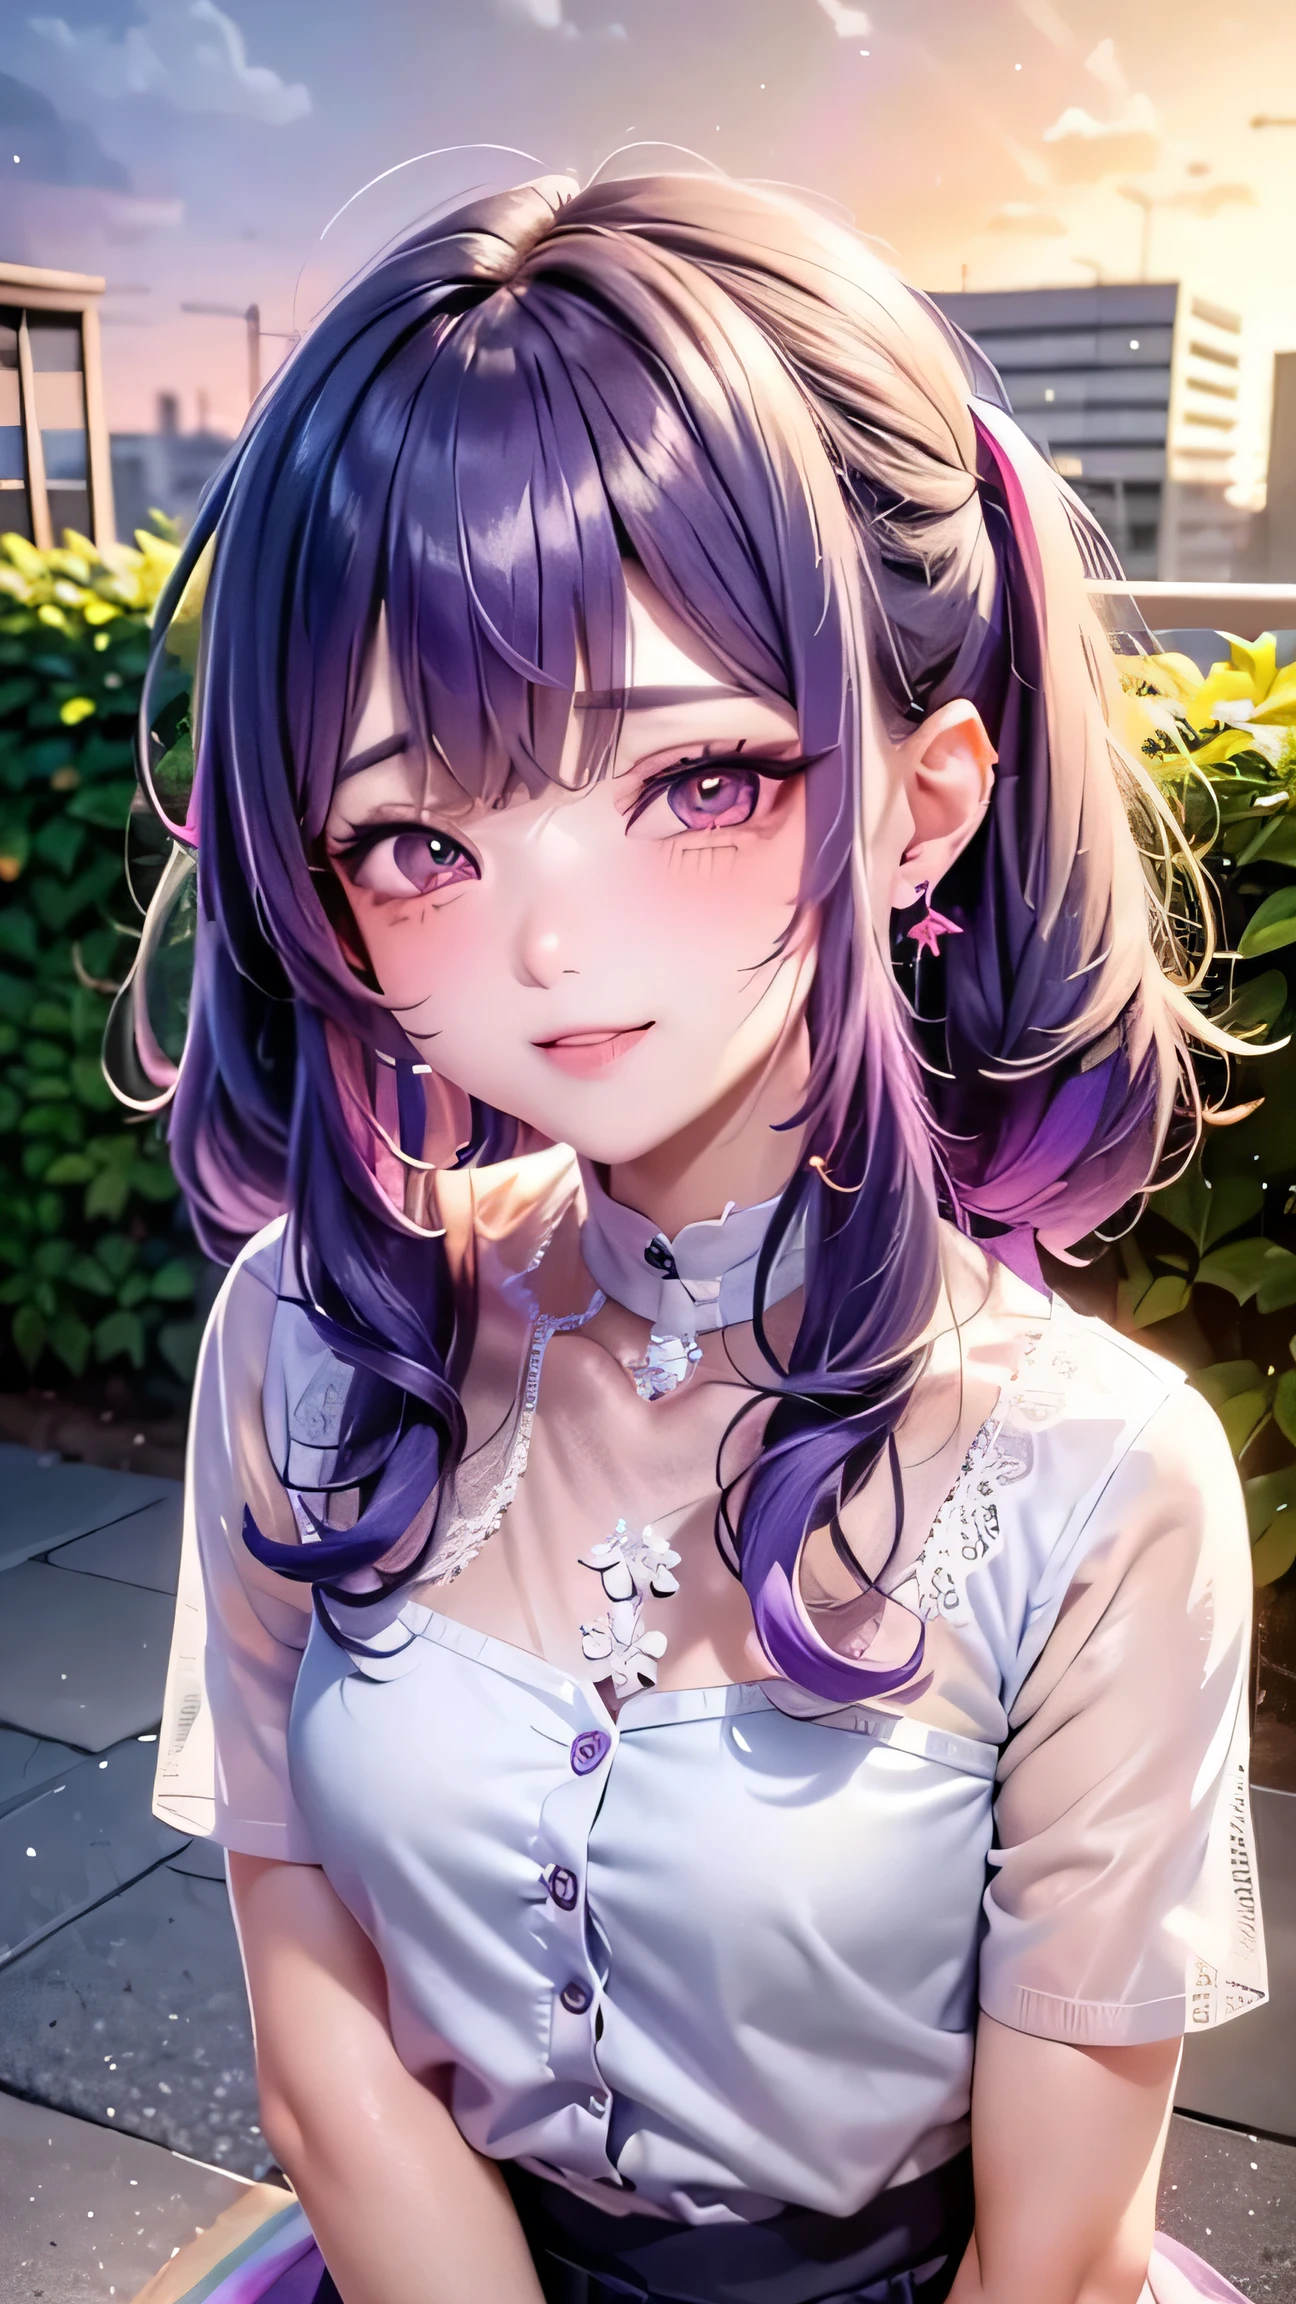 Small face、 (alone:1.5,)Very detailed,Bright colors, Very beautiful and detailed anime faces and eyes, Look straight, Shiny_skin,girl, (((Rainbow Hair, Colorful Hair, Half blue、Half Purple Hair: 1.2))), 、Shiny hair, Delicate and beautiful face, blush、Glasses、(Turquoise Eyes), , Valletta, Earrings,、garden、sunset、(（(Stylish lace mini skirt,Translucent shirt)))、（Twin tails）、smile、smile、Face dyed red、hilarious pose、dynamic、